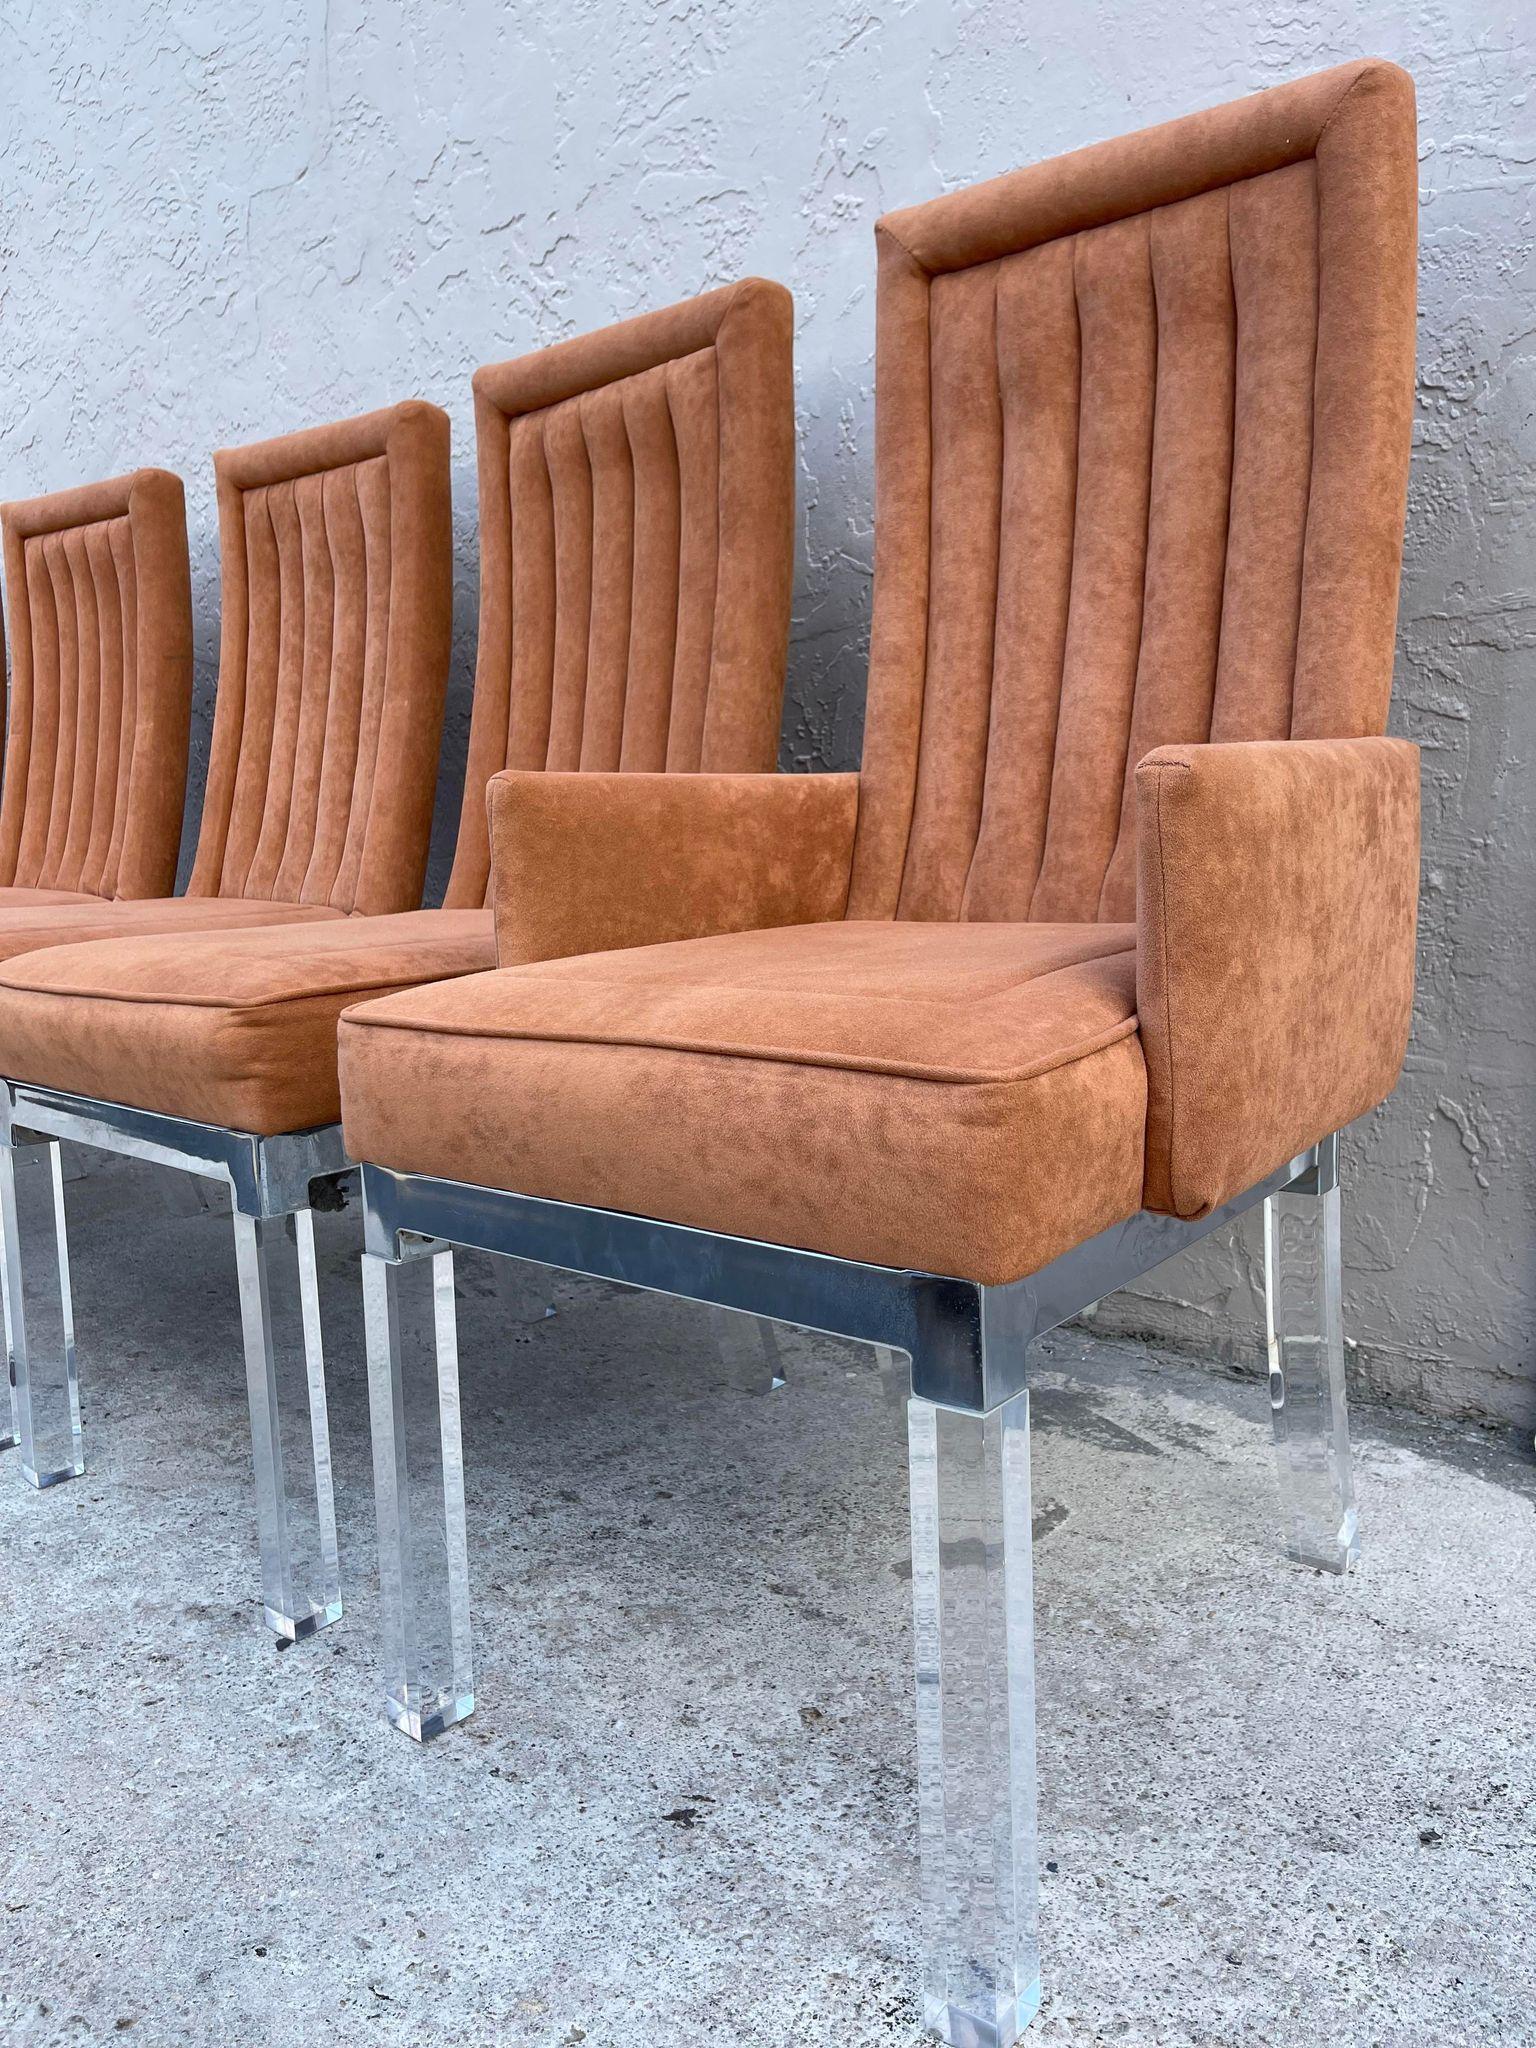 Spectacular set of 6 Charles Hollis Jones Chrome and Lucite Dining Chairs including 2 Captains chairs and 4 side chairs. Pristine Original Vintage Condition with Original Ultra Suede Upholstery fabric. 


Condition Disclosure:
Please understand